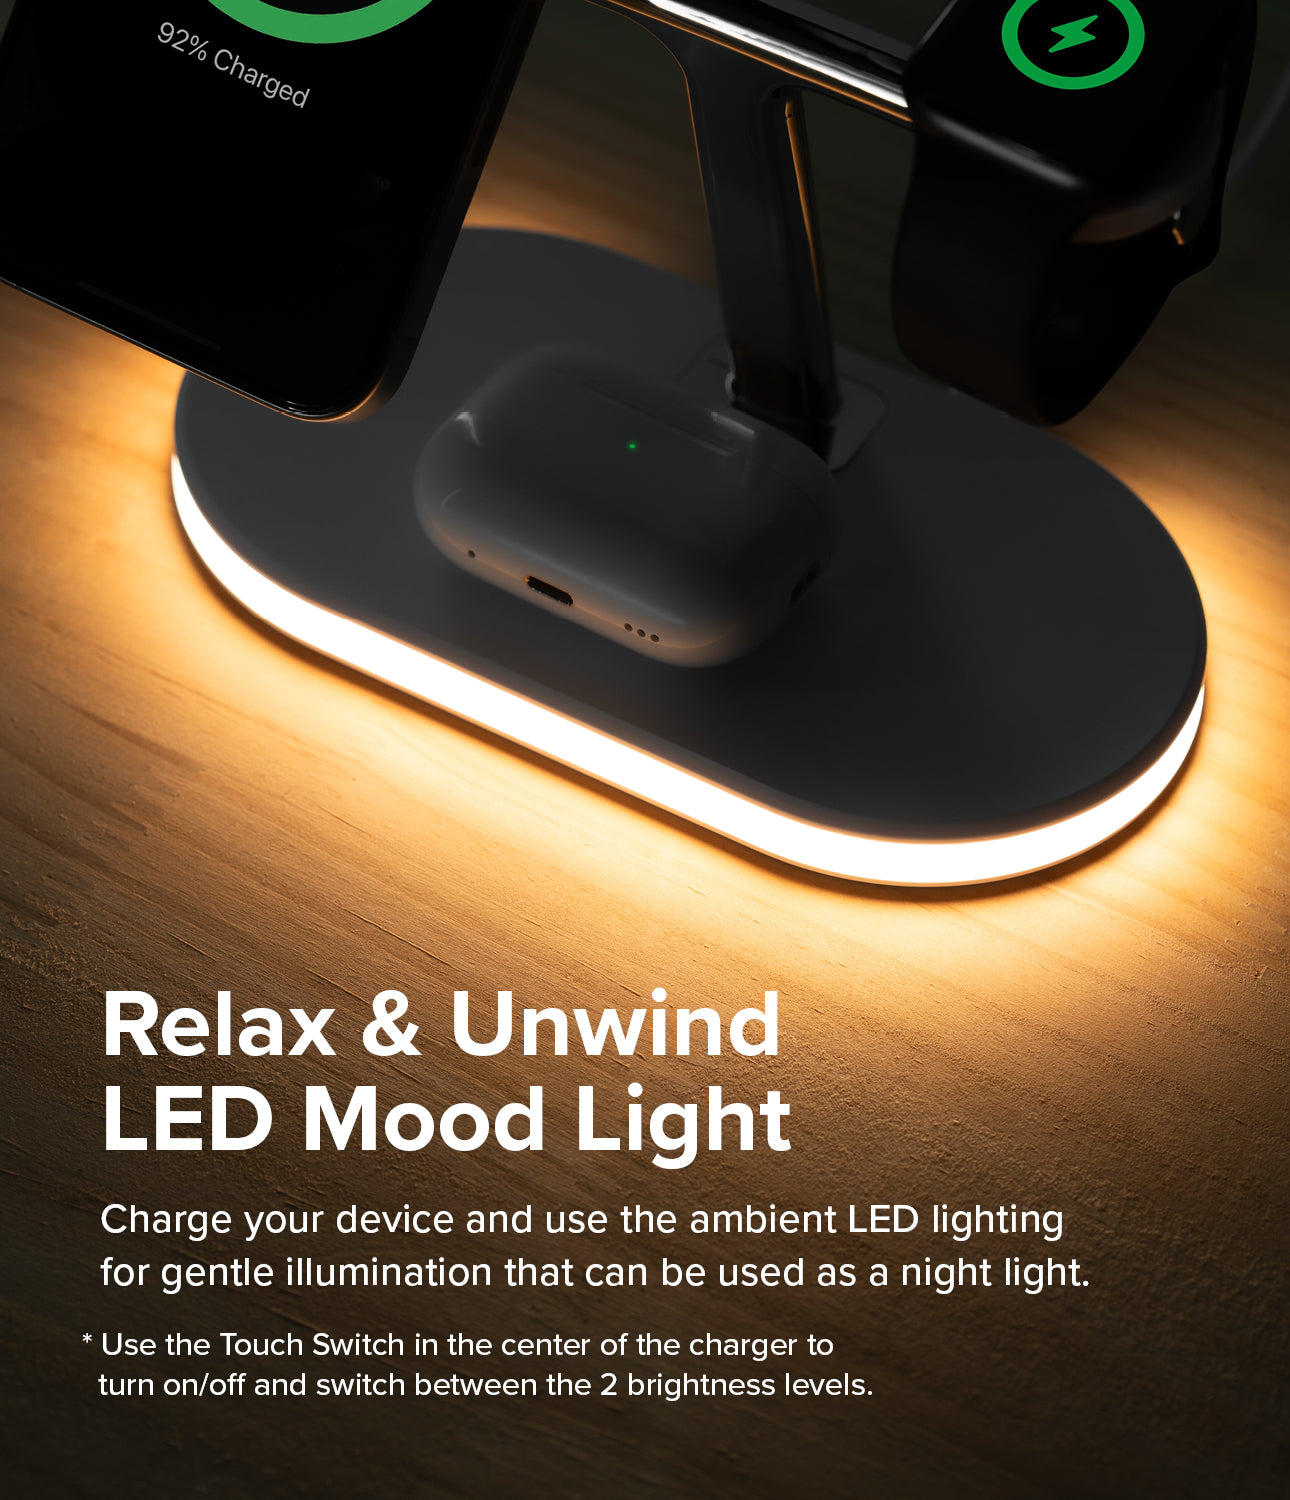 Ringke 3-in-1 Wireless Charger Stand - Relax and Unwind LED Mood Light. Charge your device and use the ambient LED lightning for gentle illumination that can be used as a night light. Use the touch switch in the center of the charger to turn on/off and switch between the 2 brightness levels.